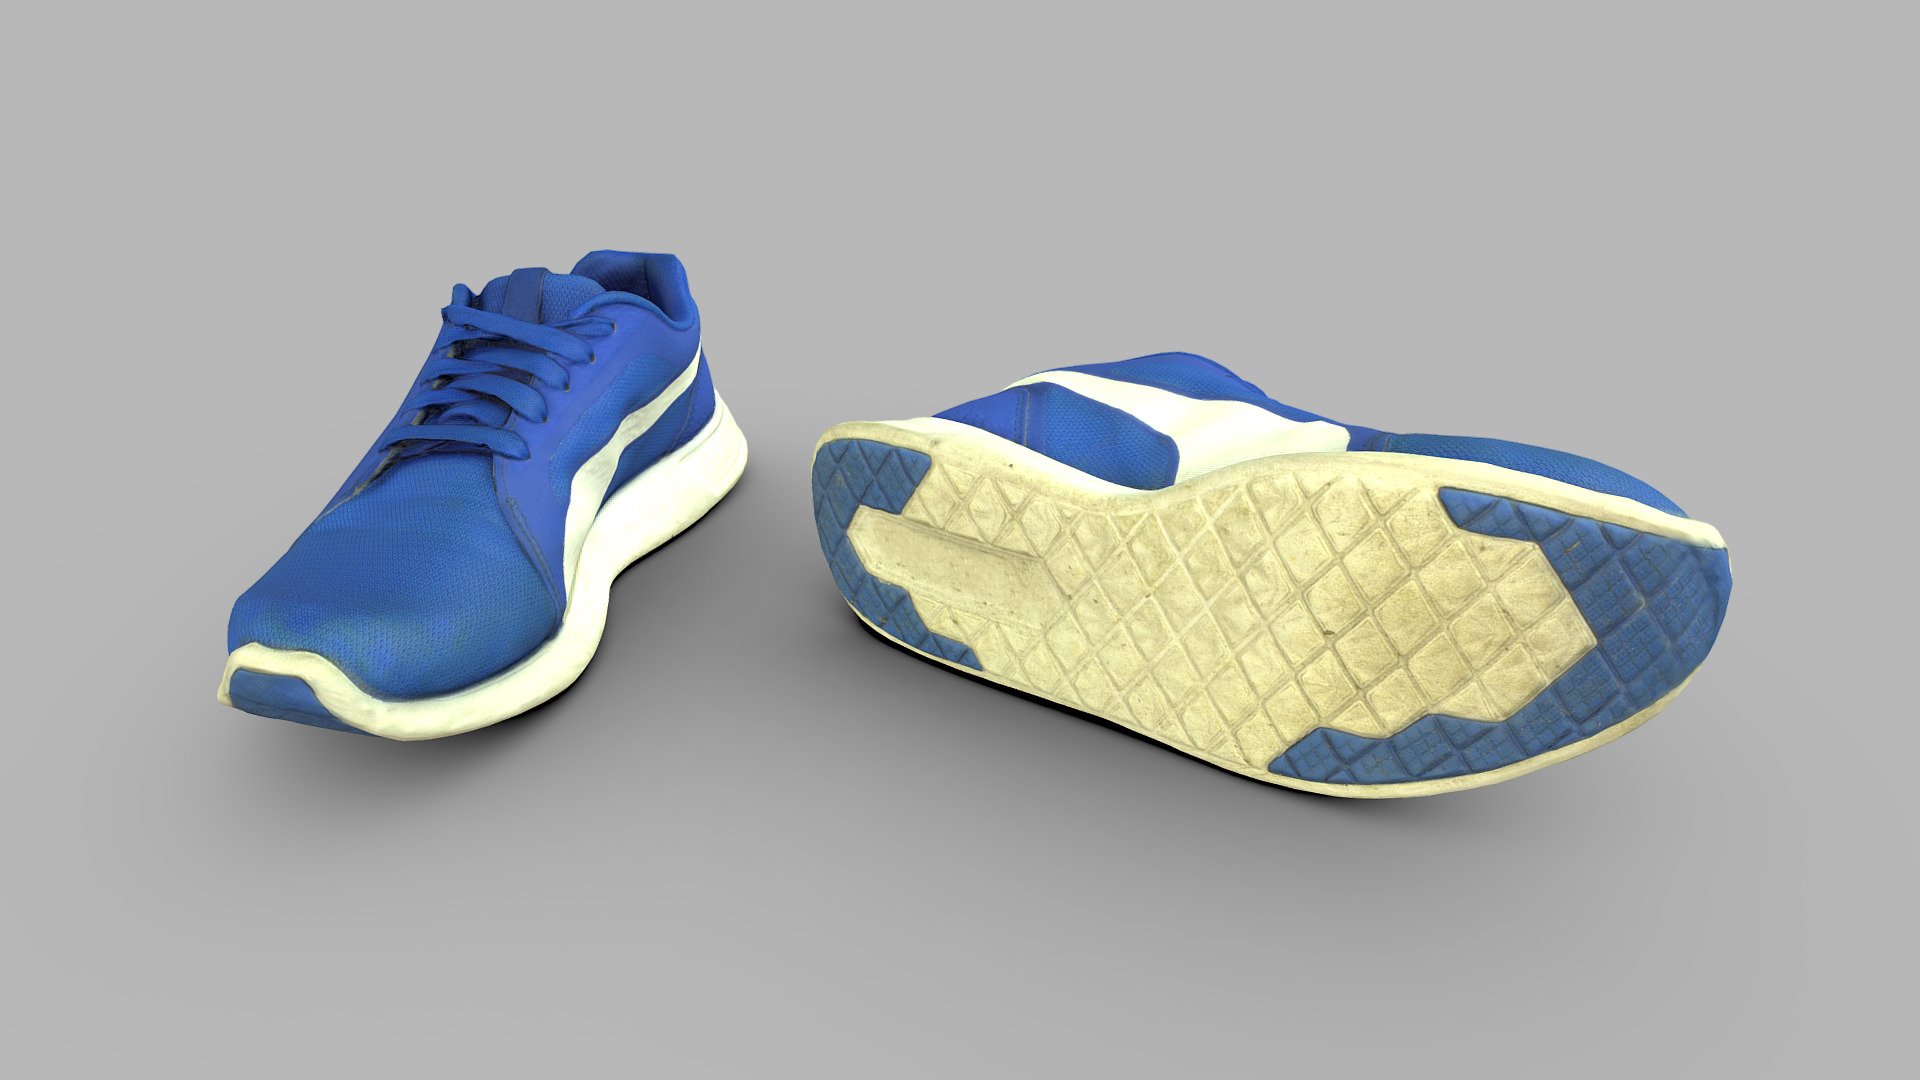 Pair of Sneakers Low Poly

Topology: Quads

Polygon count: 8485

Vertices count: 8481

Textures: Diffuse, Normal, Specular, Glossiness, Ambient Occlusion ( all in 4k resolution)

UV mapped with non-overlapping

All files are zipped in one folder. Contains 3 file formats obj, blend &amp; fbx

Useful for games, renders and other graphical projects.

Thank you for interest. Best regards! - Pair of Sneakers - Buy Royalty Free 3D model by Radju 3d model